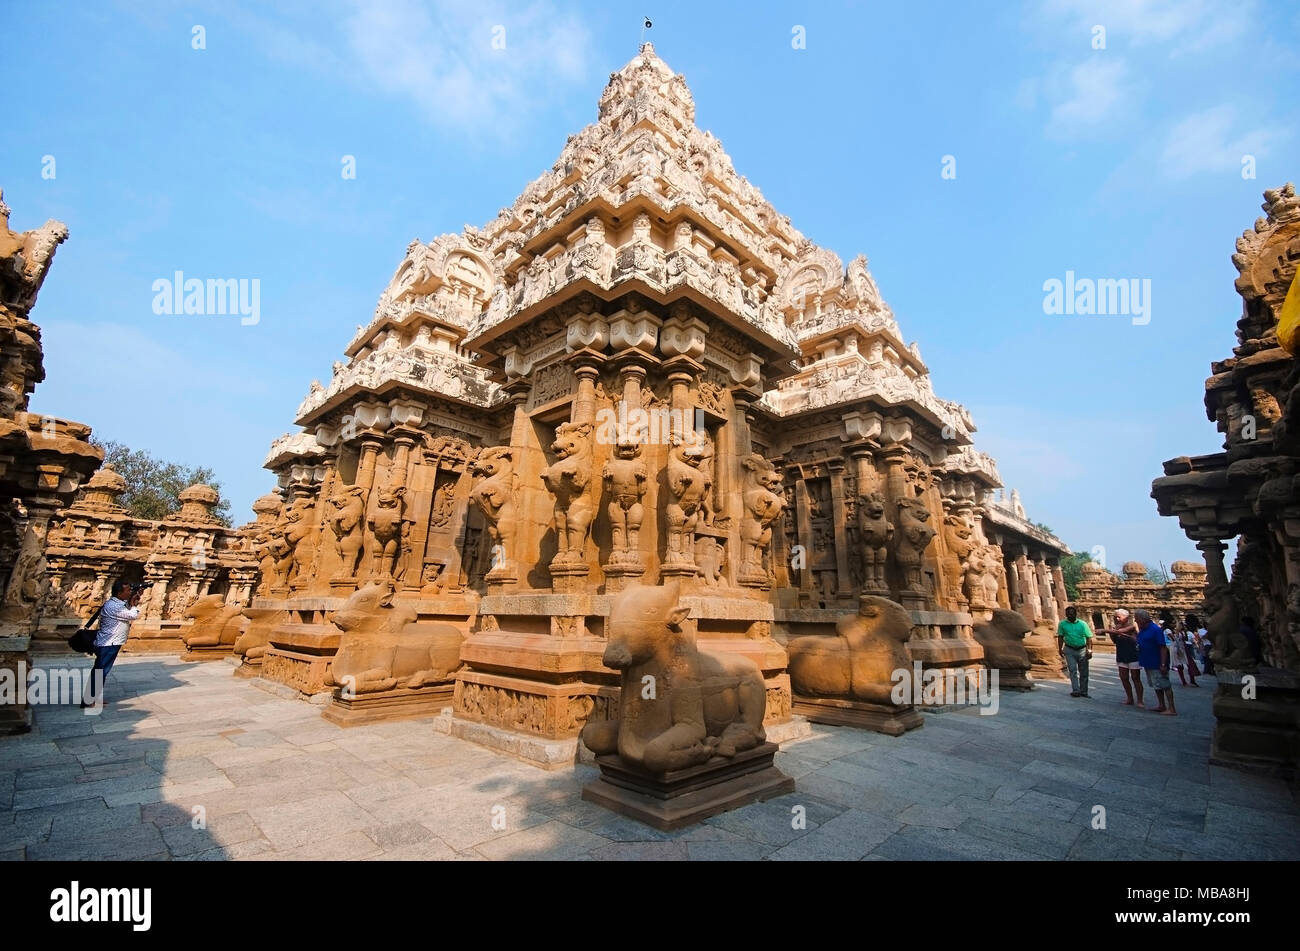 Outer view of Kanchi Kailasanathar temple, Kanchipuram, Tamil Nadu, India. Hindu temple in Dravidian architectural style, dedicated to the Lord Shiva Stock Photo